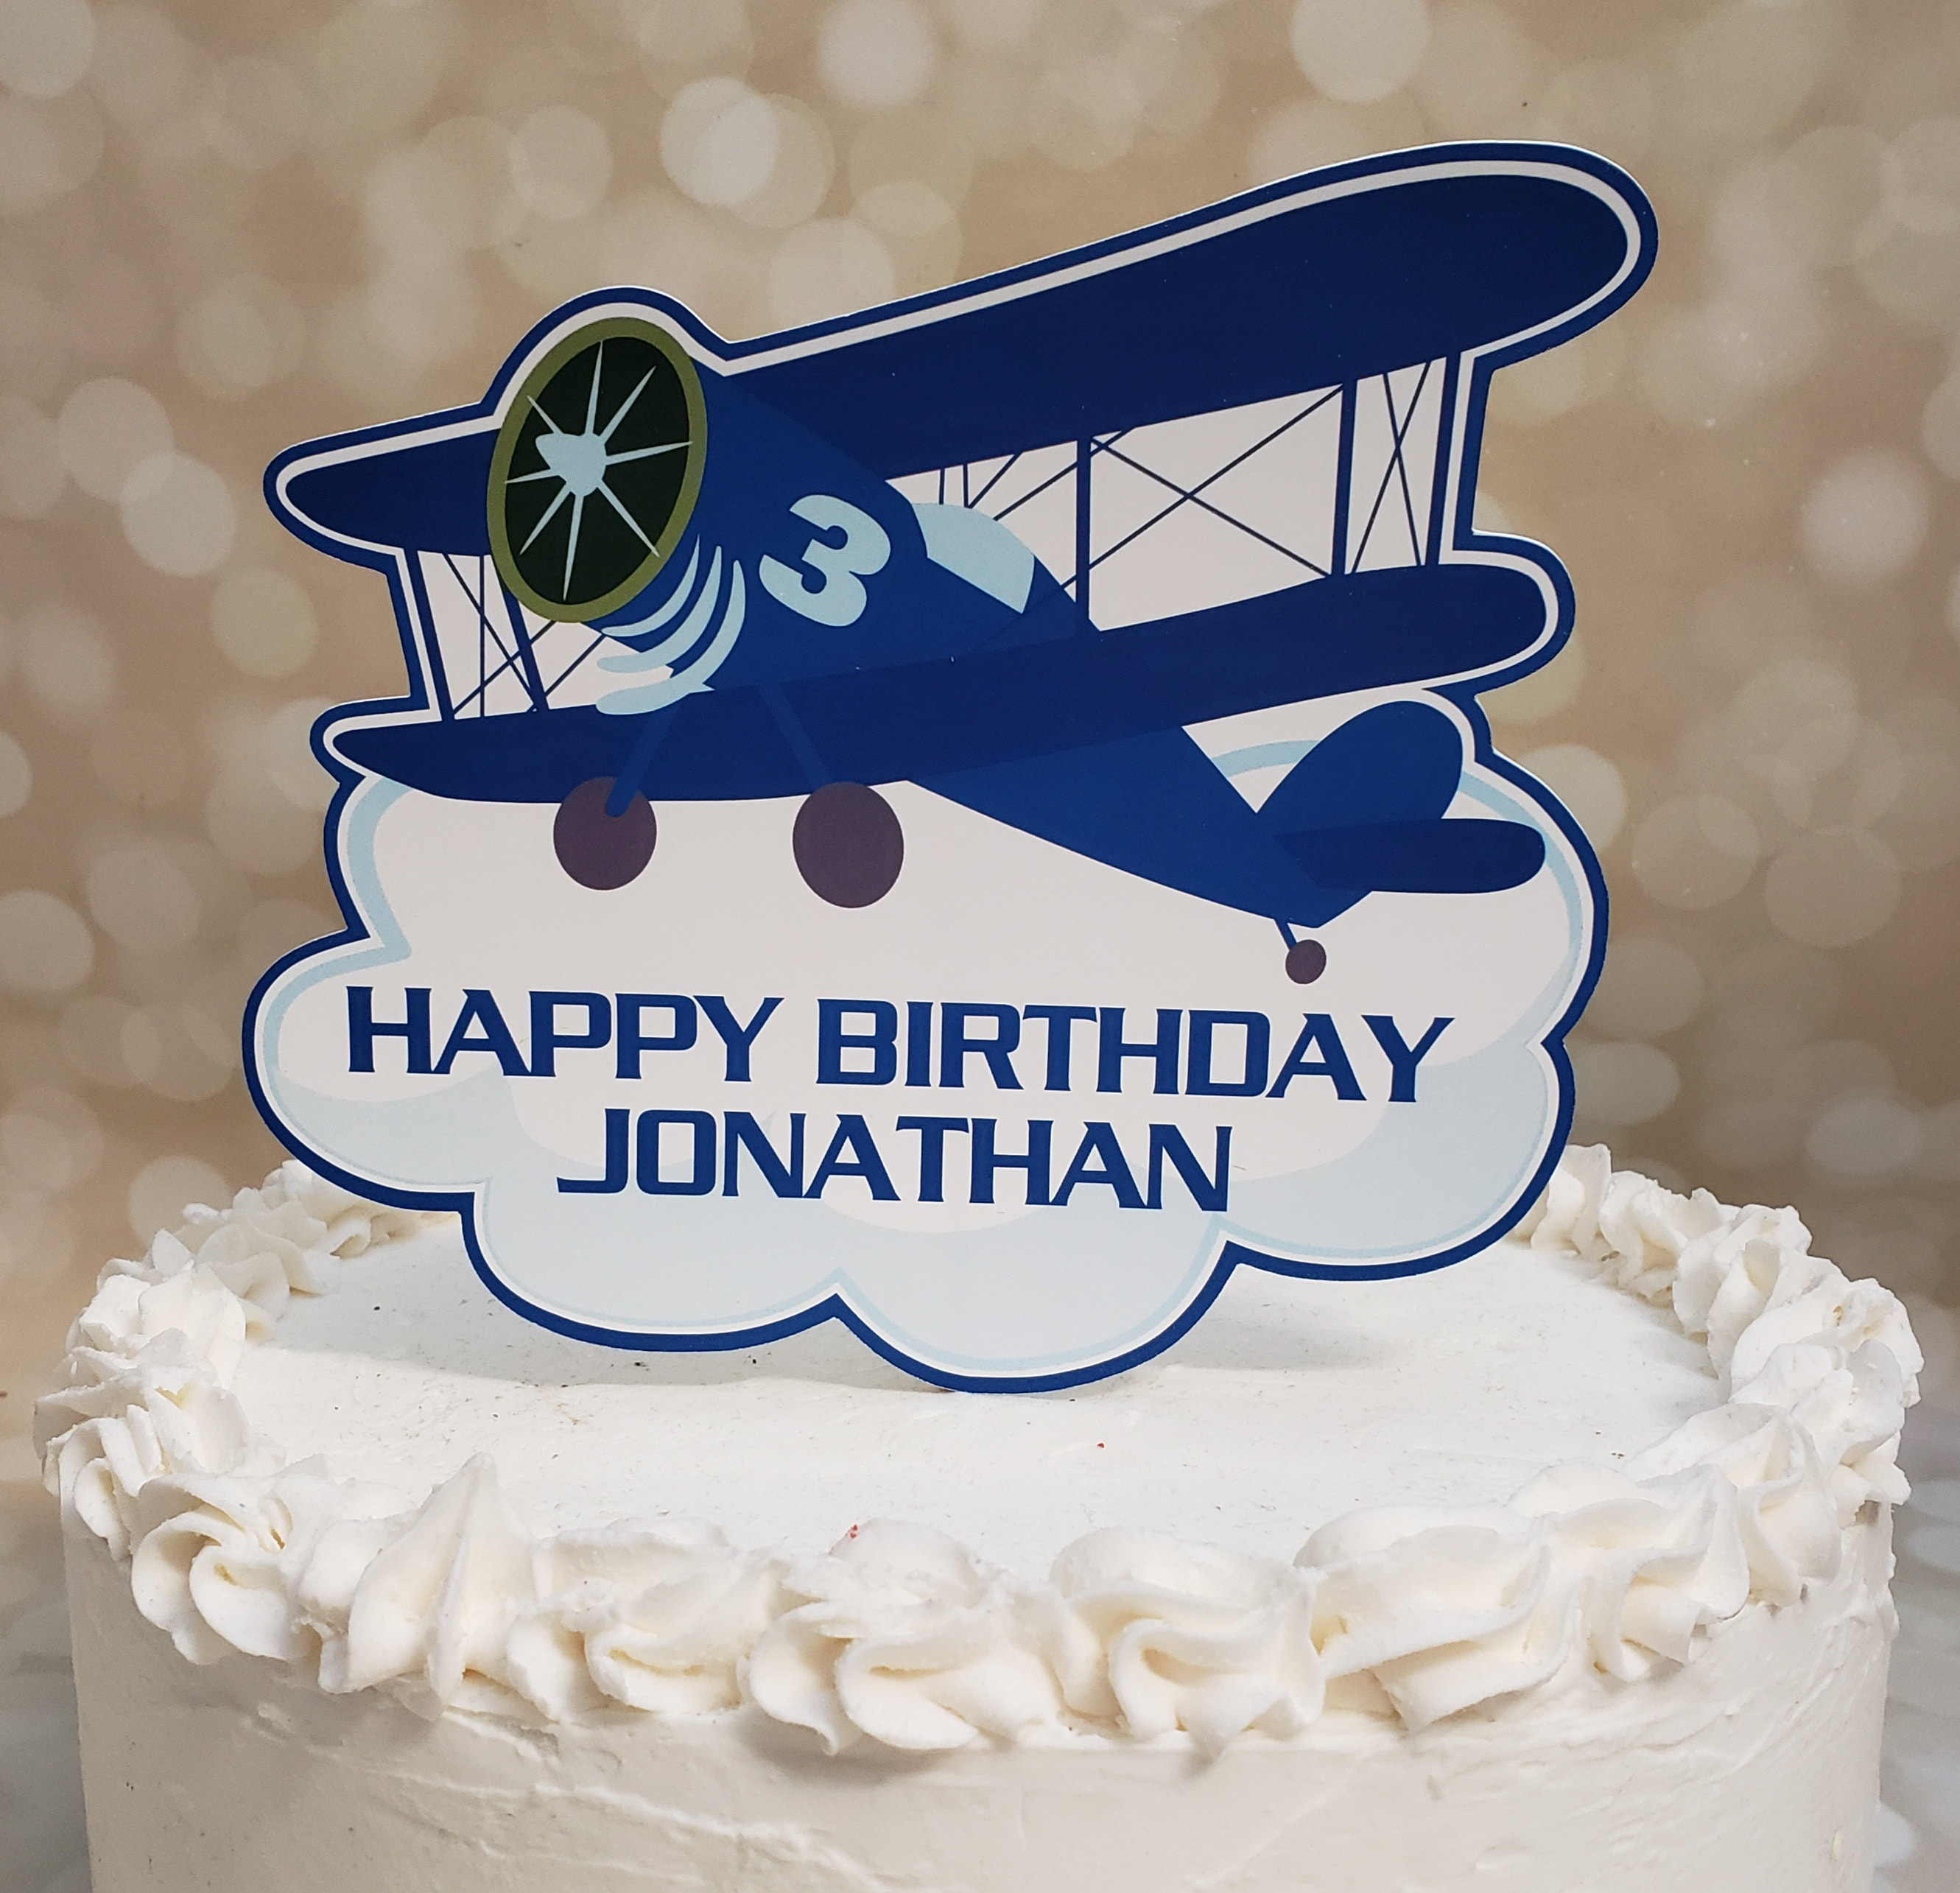 3D Airplane Cake Topper Tutorial - How to Make an Airplane Cake Topper -  YouTube